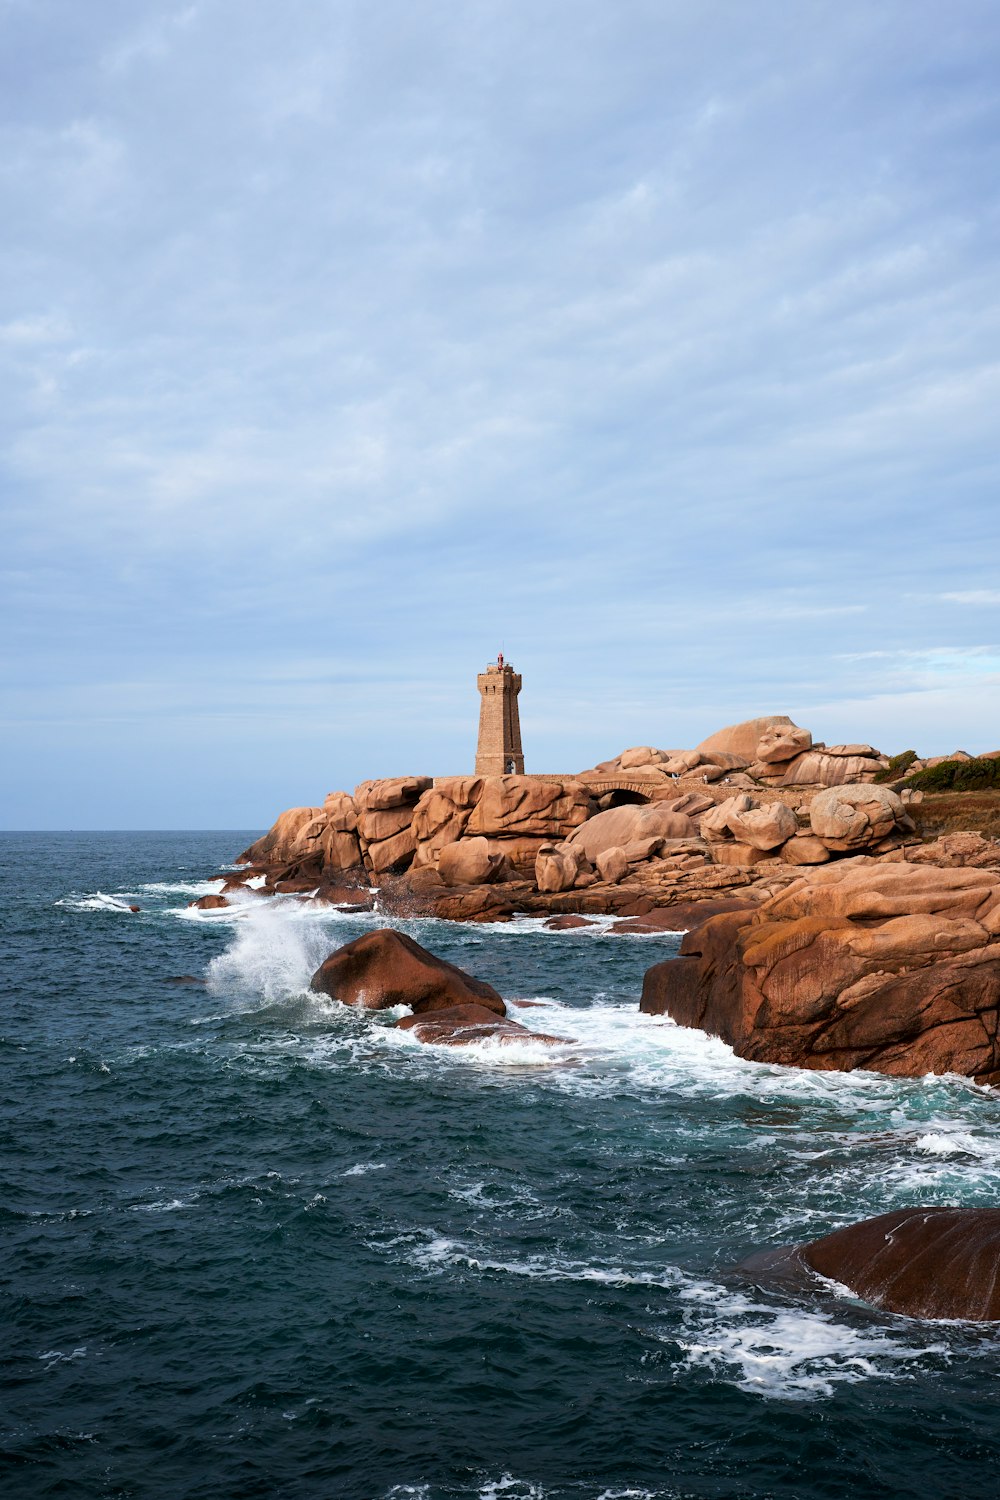 a lighthouse on a rocky shore with a body of water in the foreground